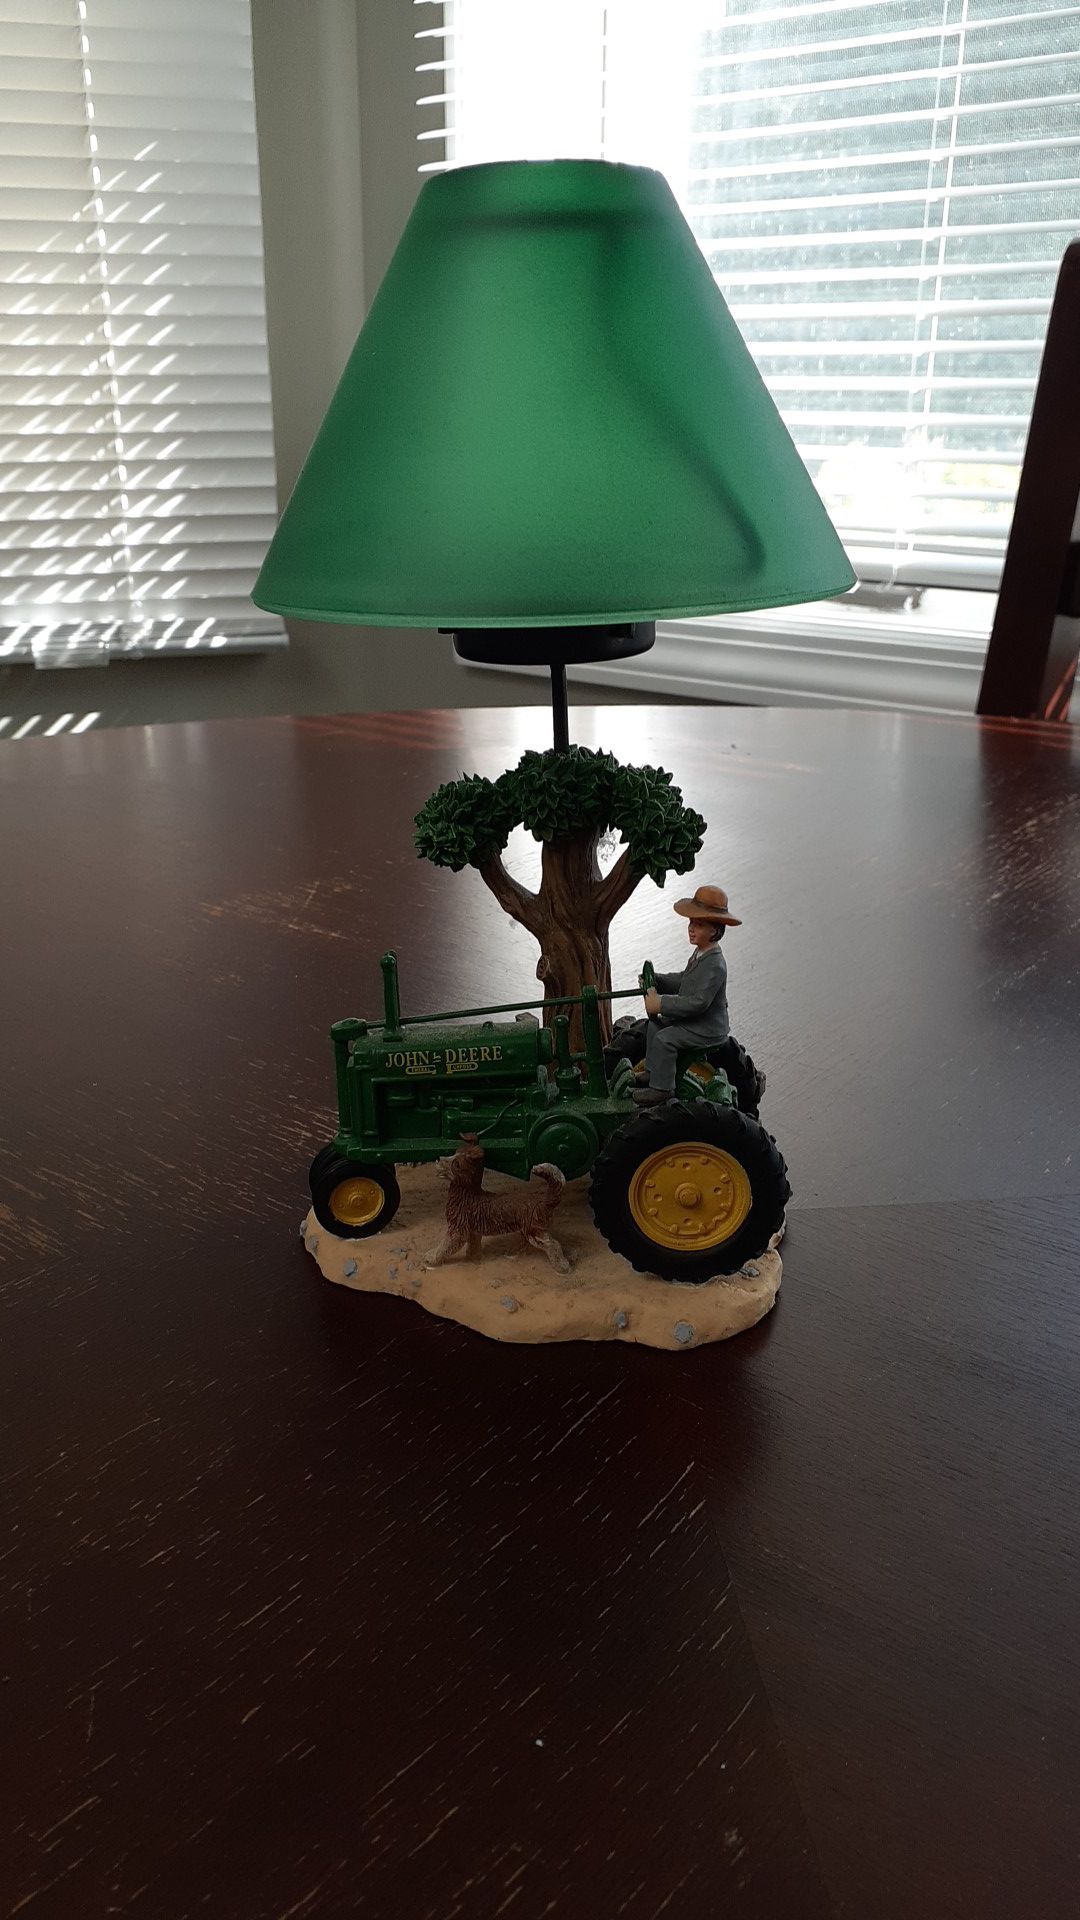 COLLECTABLE JOHN DEERE CANDLE LAMP